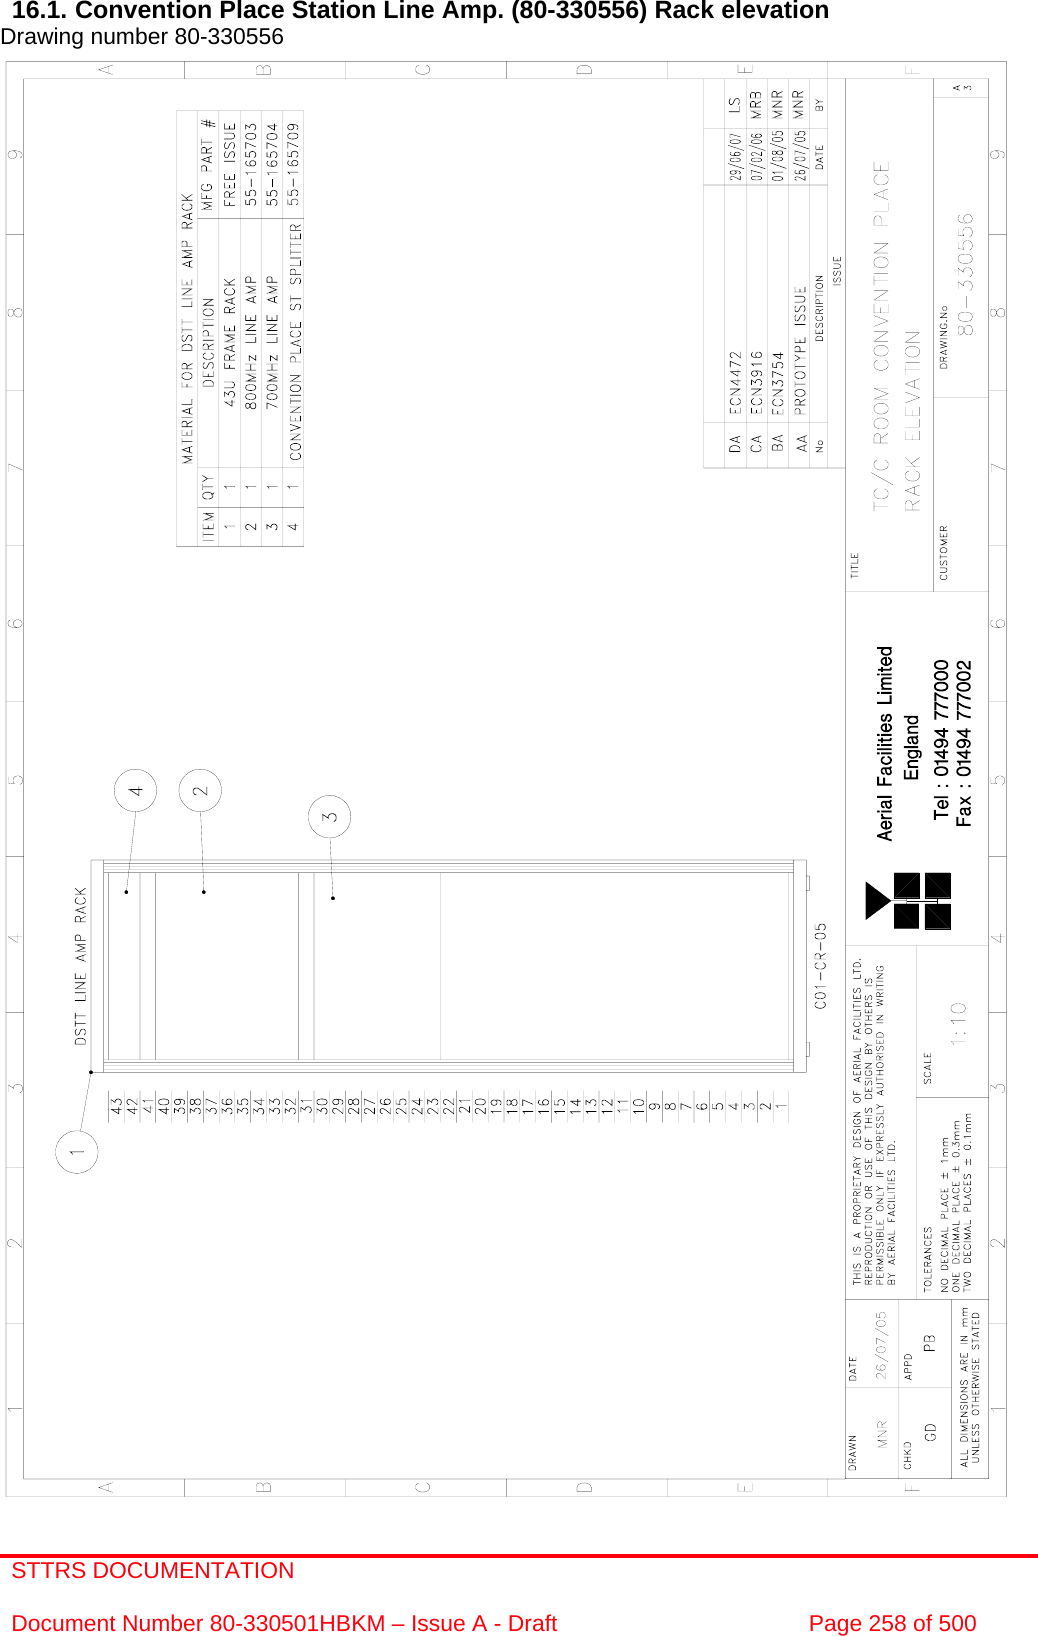 STTRS DOCUMENTATION  Document Number 80-330501HBKM – Issue A - Draft  Page 258 of 500   16.1. Convention Place Station Line Amp. (80-330556) Rack elevation  Drawing number 80-330556                                                      